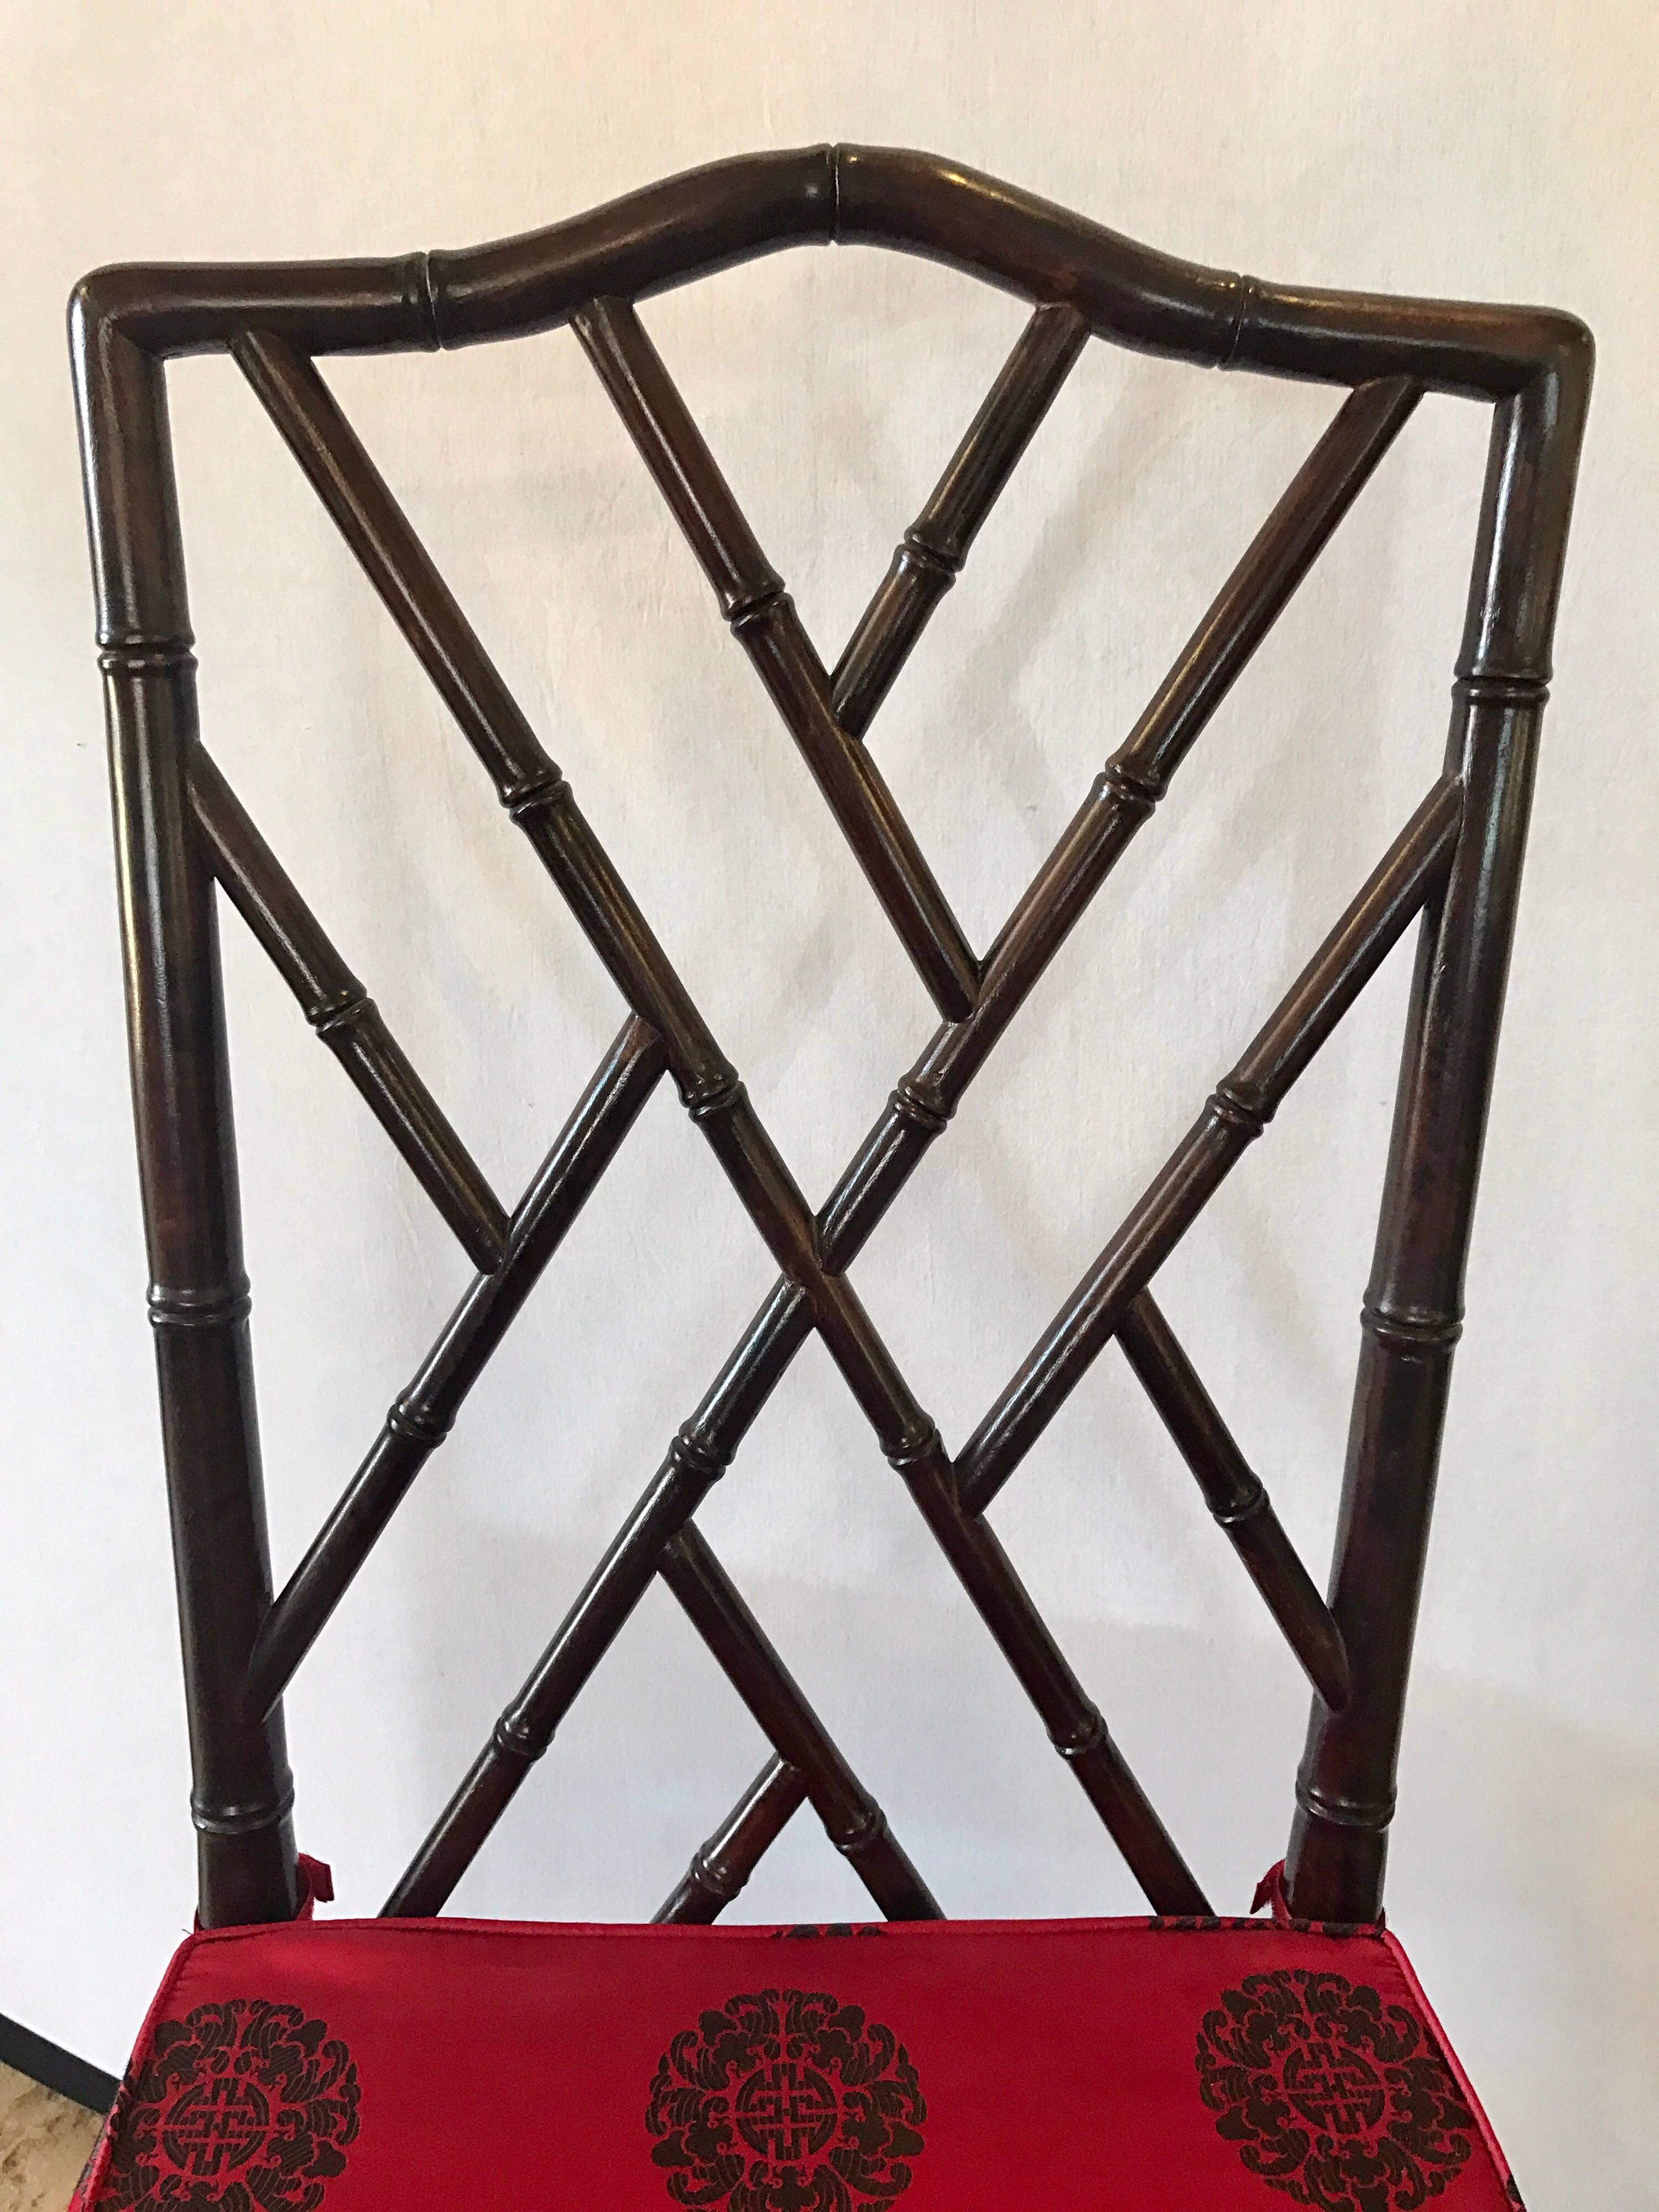 Midcentury all rosewood, faux bamboo Chinese Chippendale chairs. Your search is over. Measures: Seat height is 18 inches, all other dimensions are below.